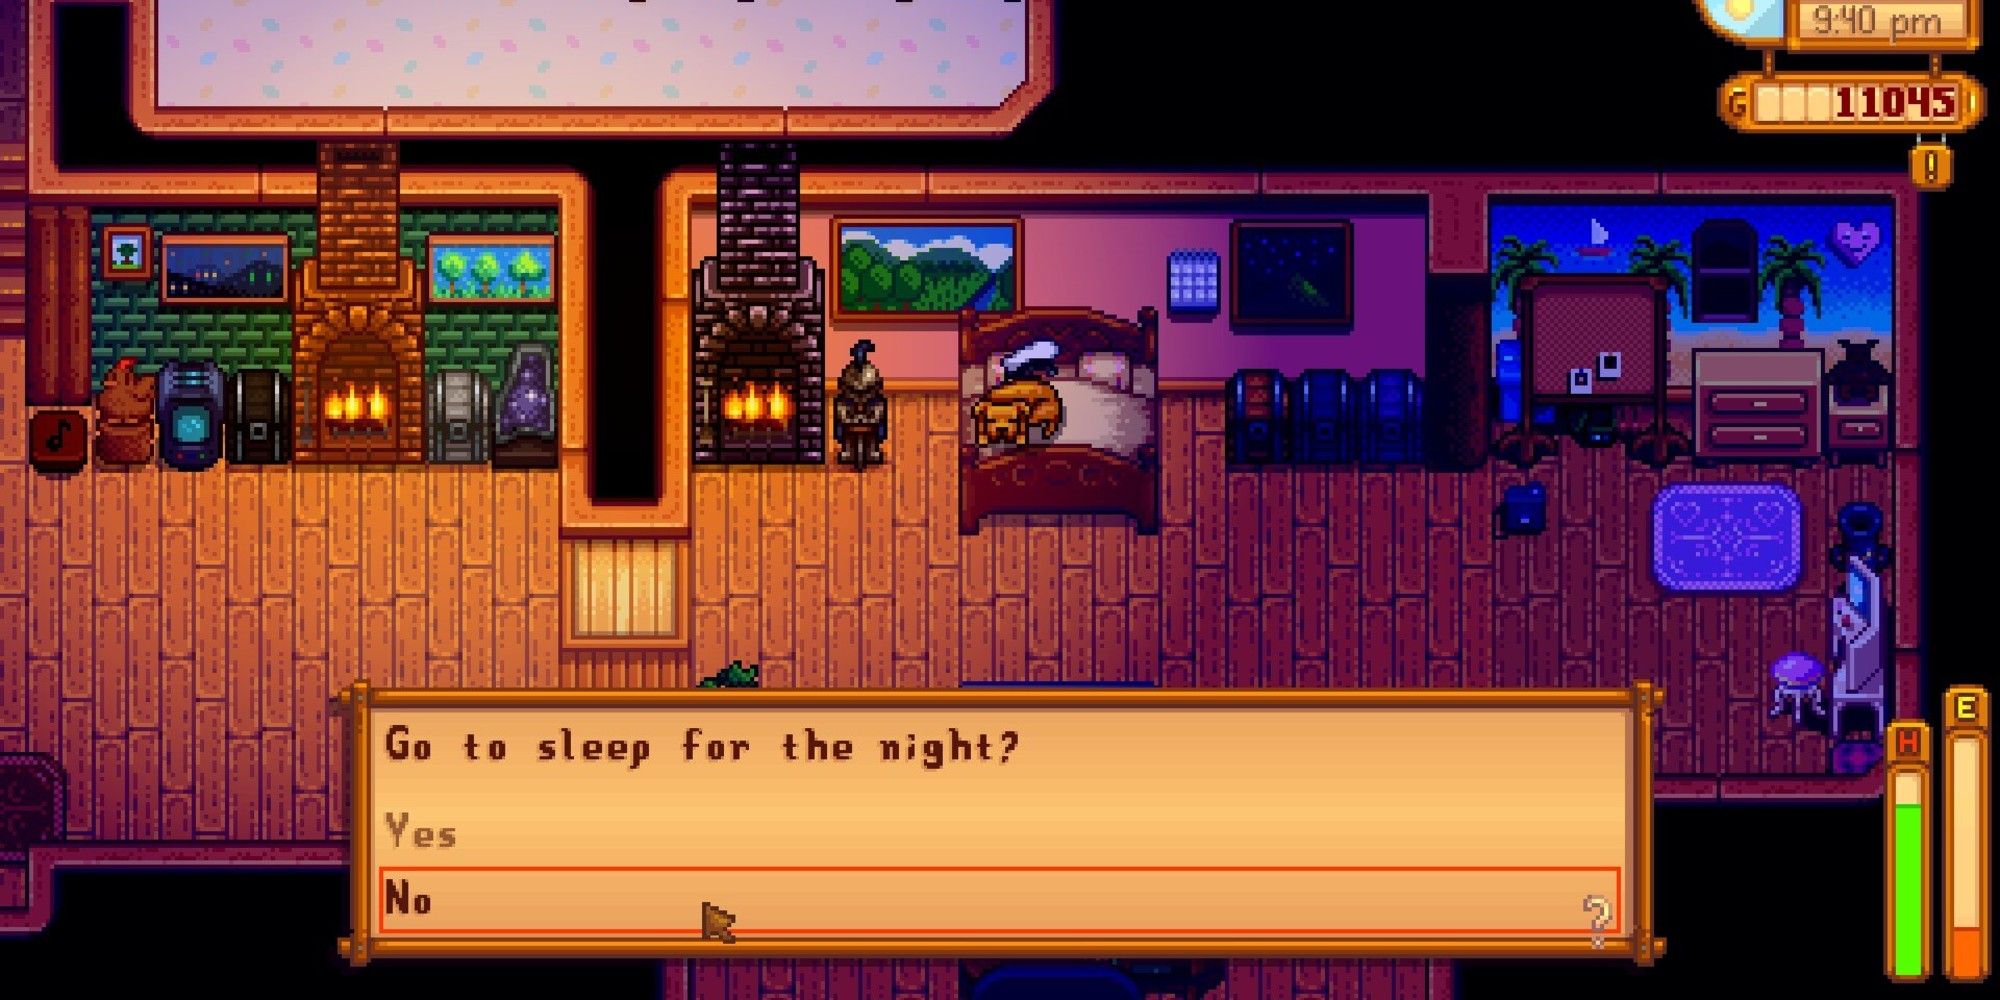 Stardew Valley Player In Their Bed With A Dog Asking Go To Sleep